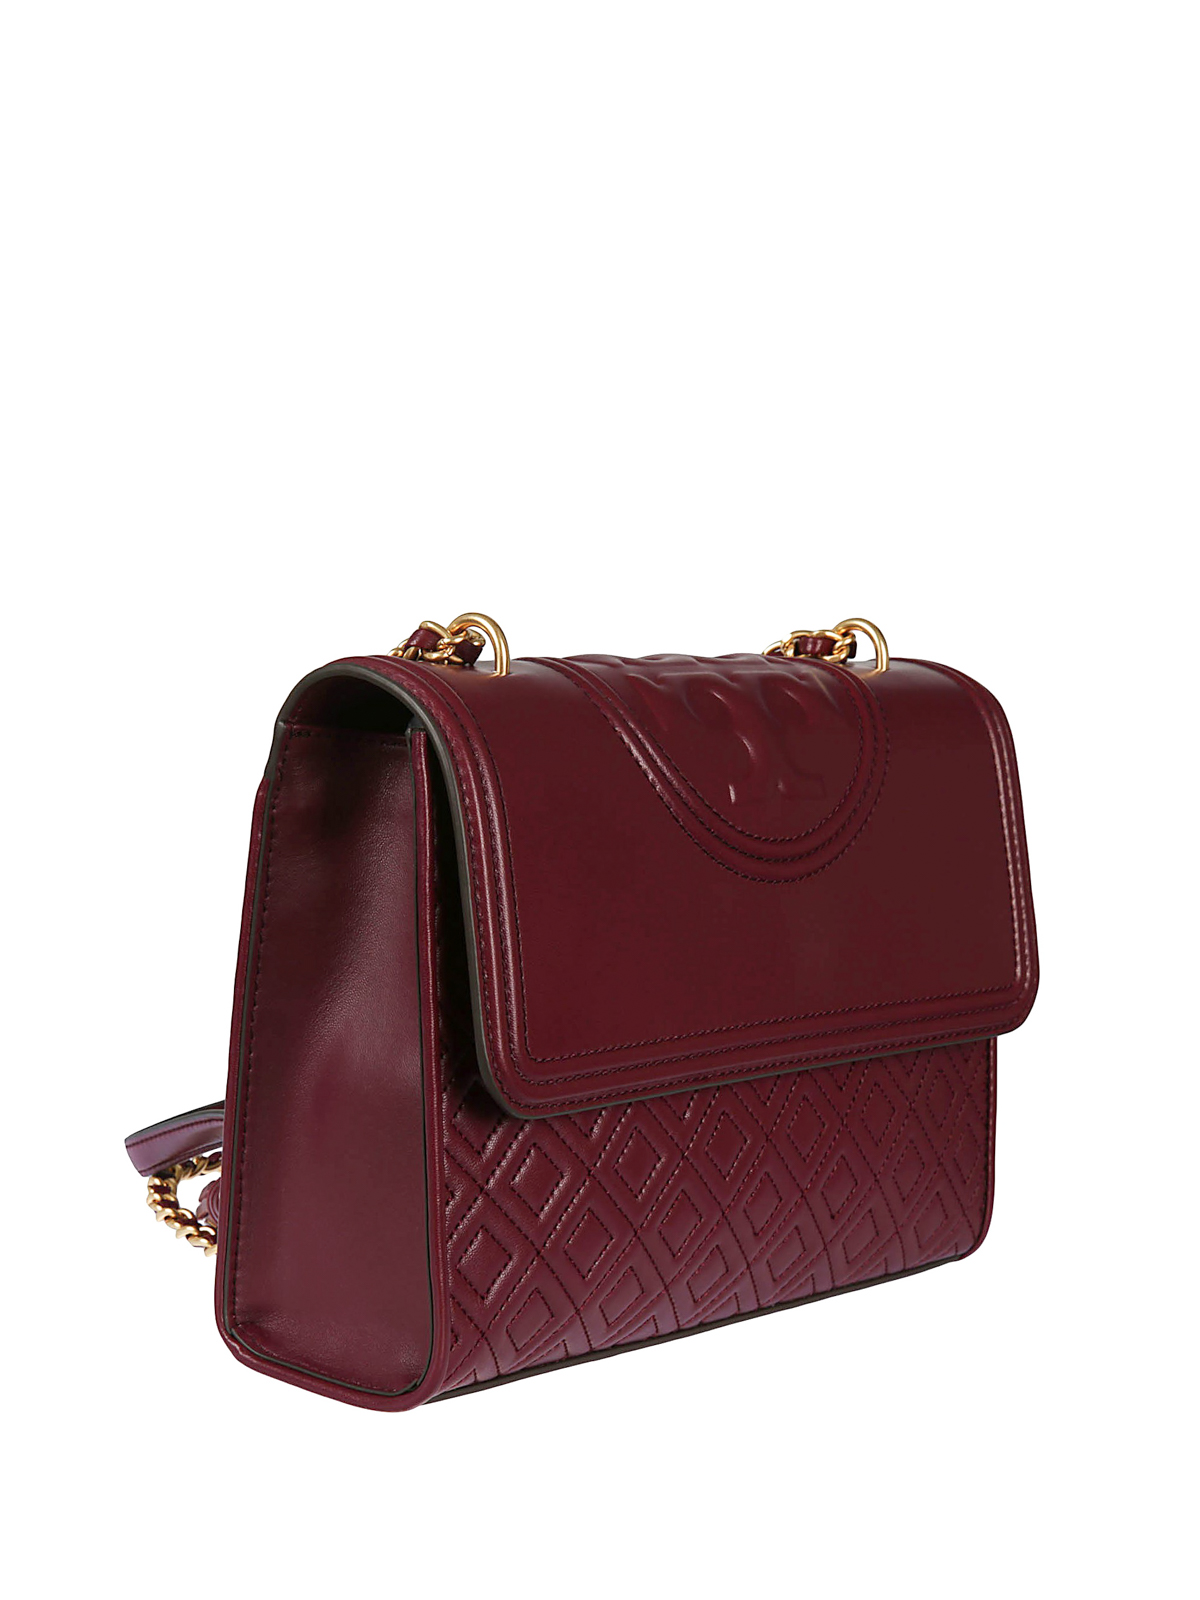 Shoulder bags Tory Burch - Fleming burgundy quilted leather bag - 43833609